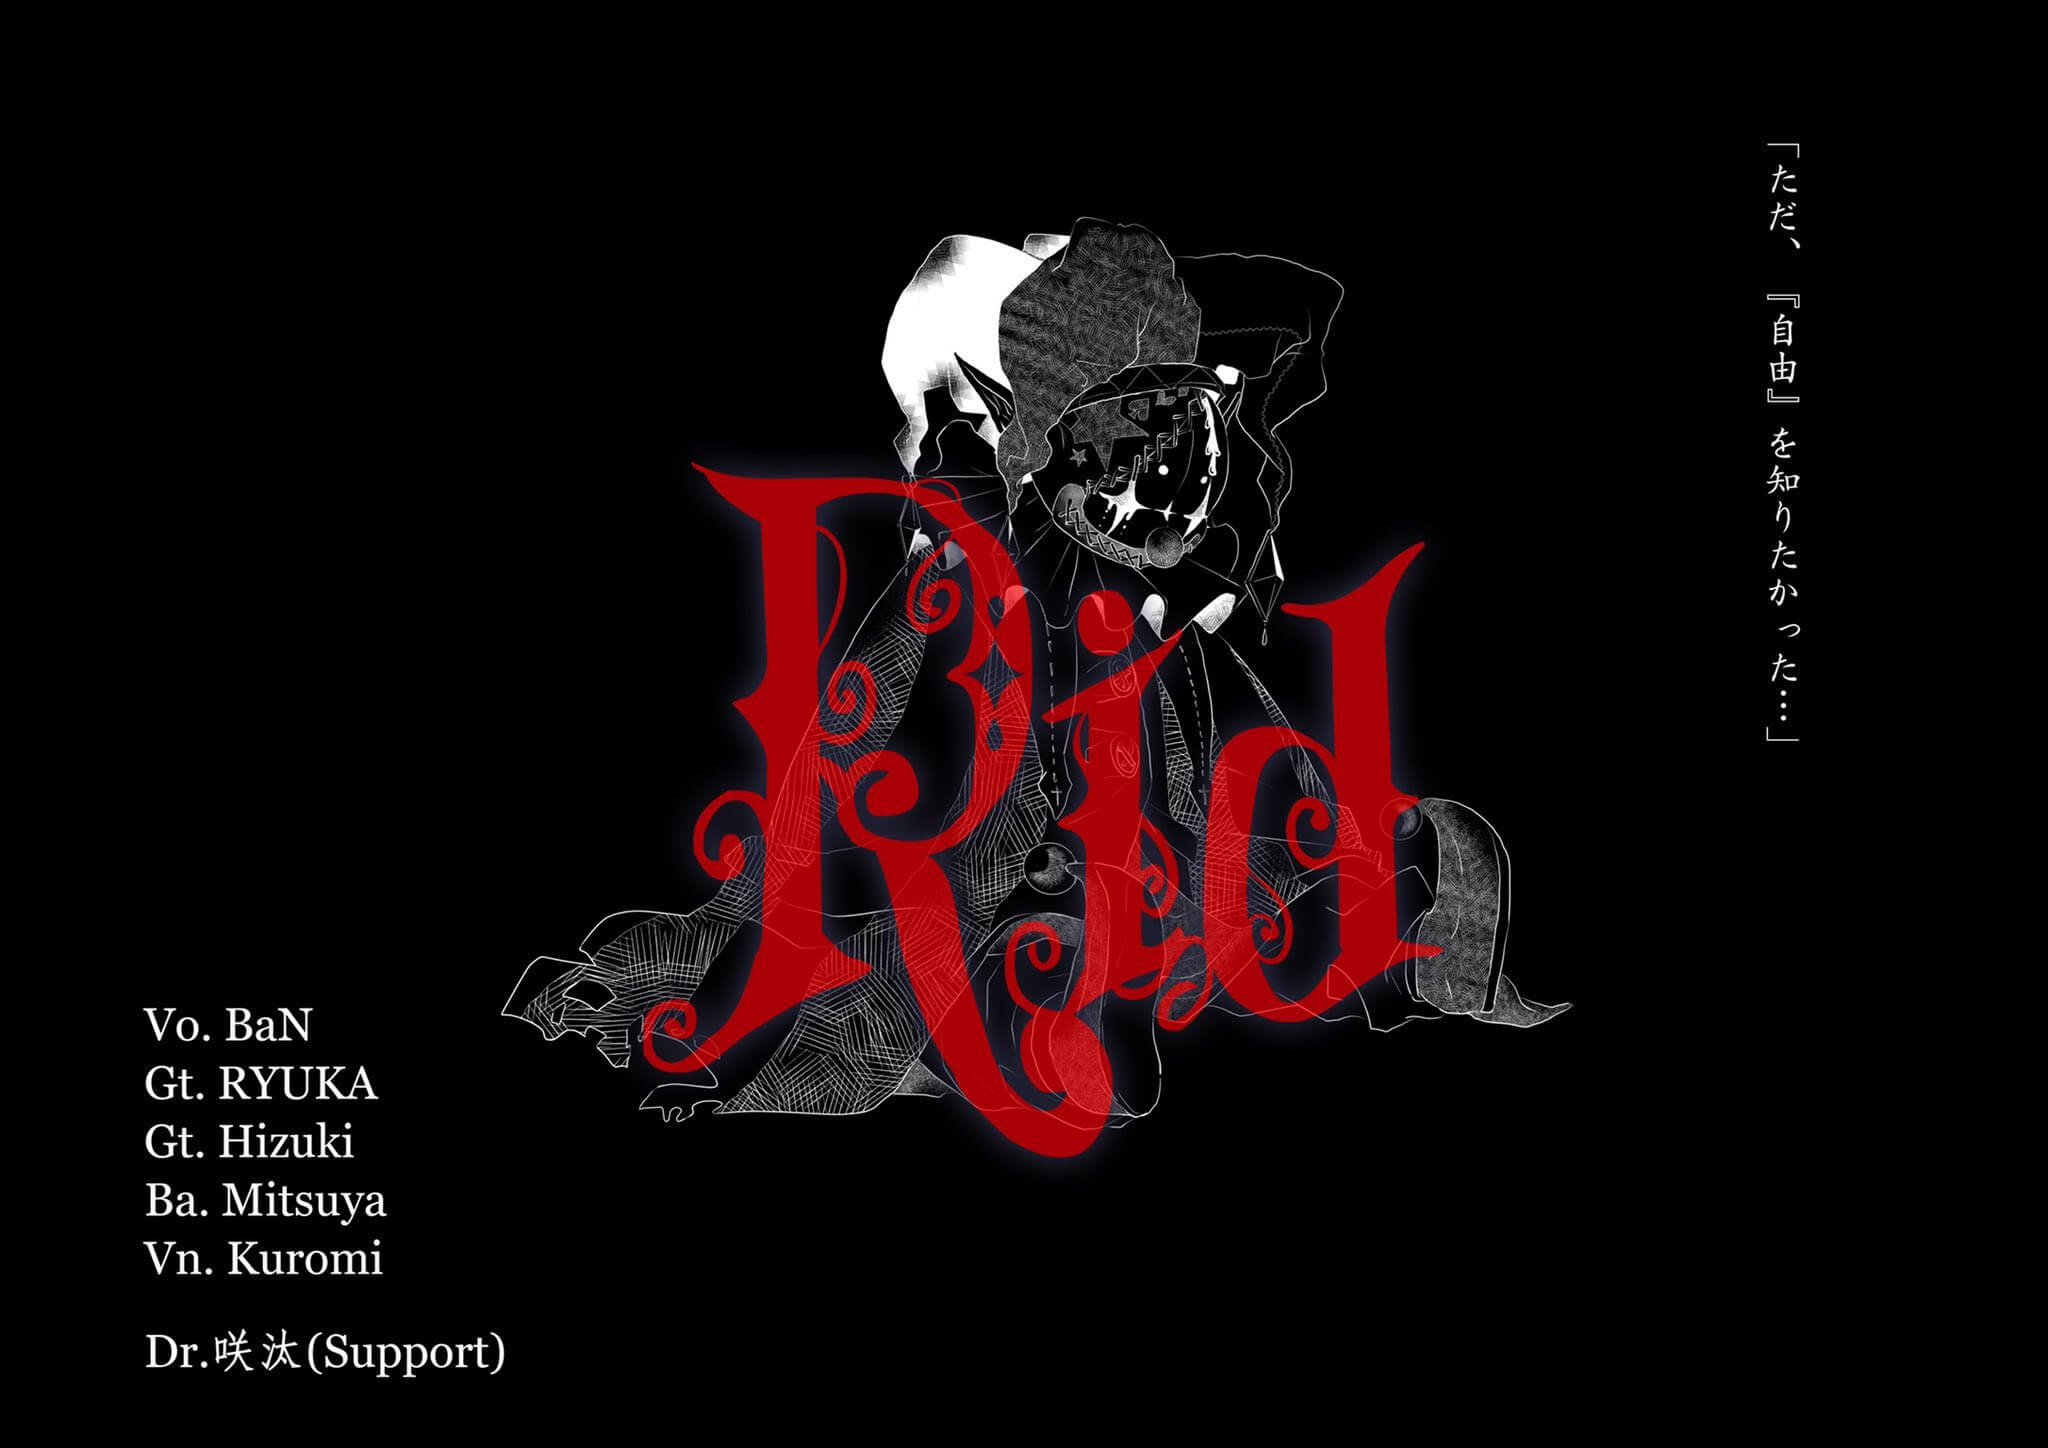 New band: Rid has formed.